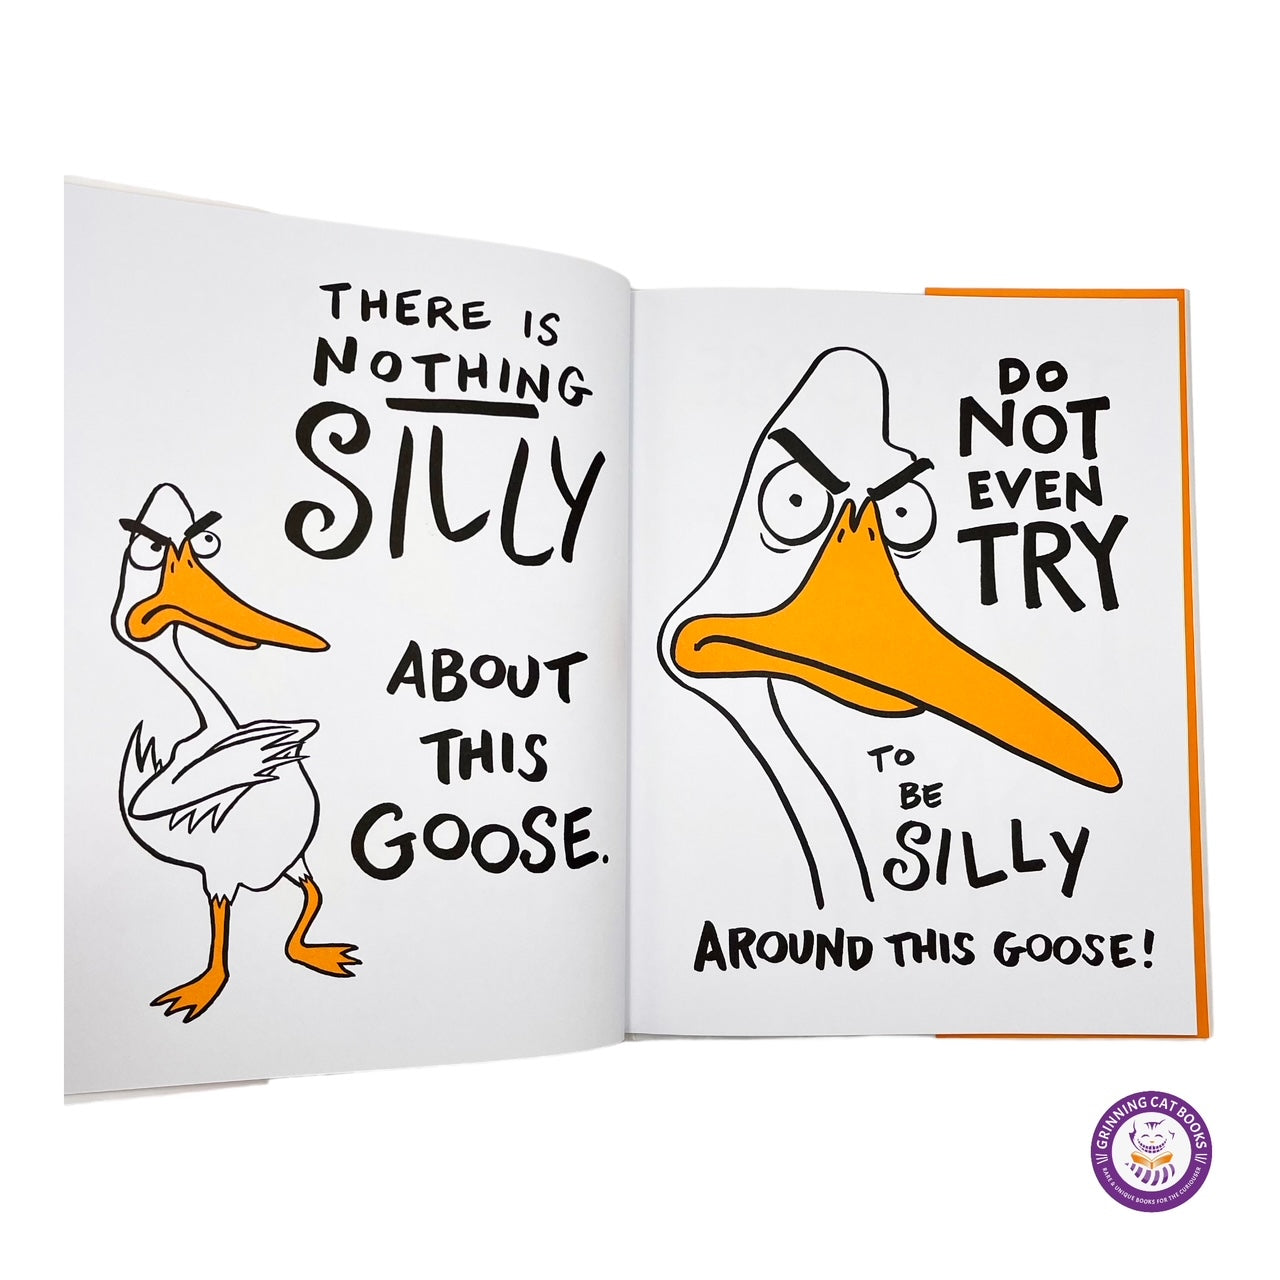 The Serious Goose (signed, written, and illustrated by Jimmy Kimmel)